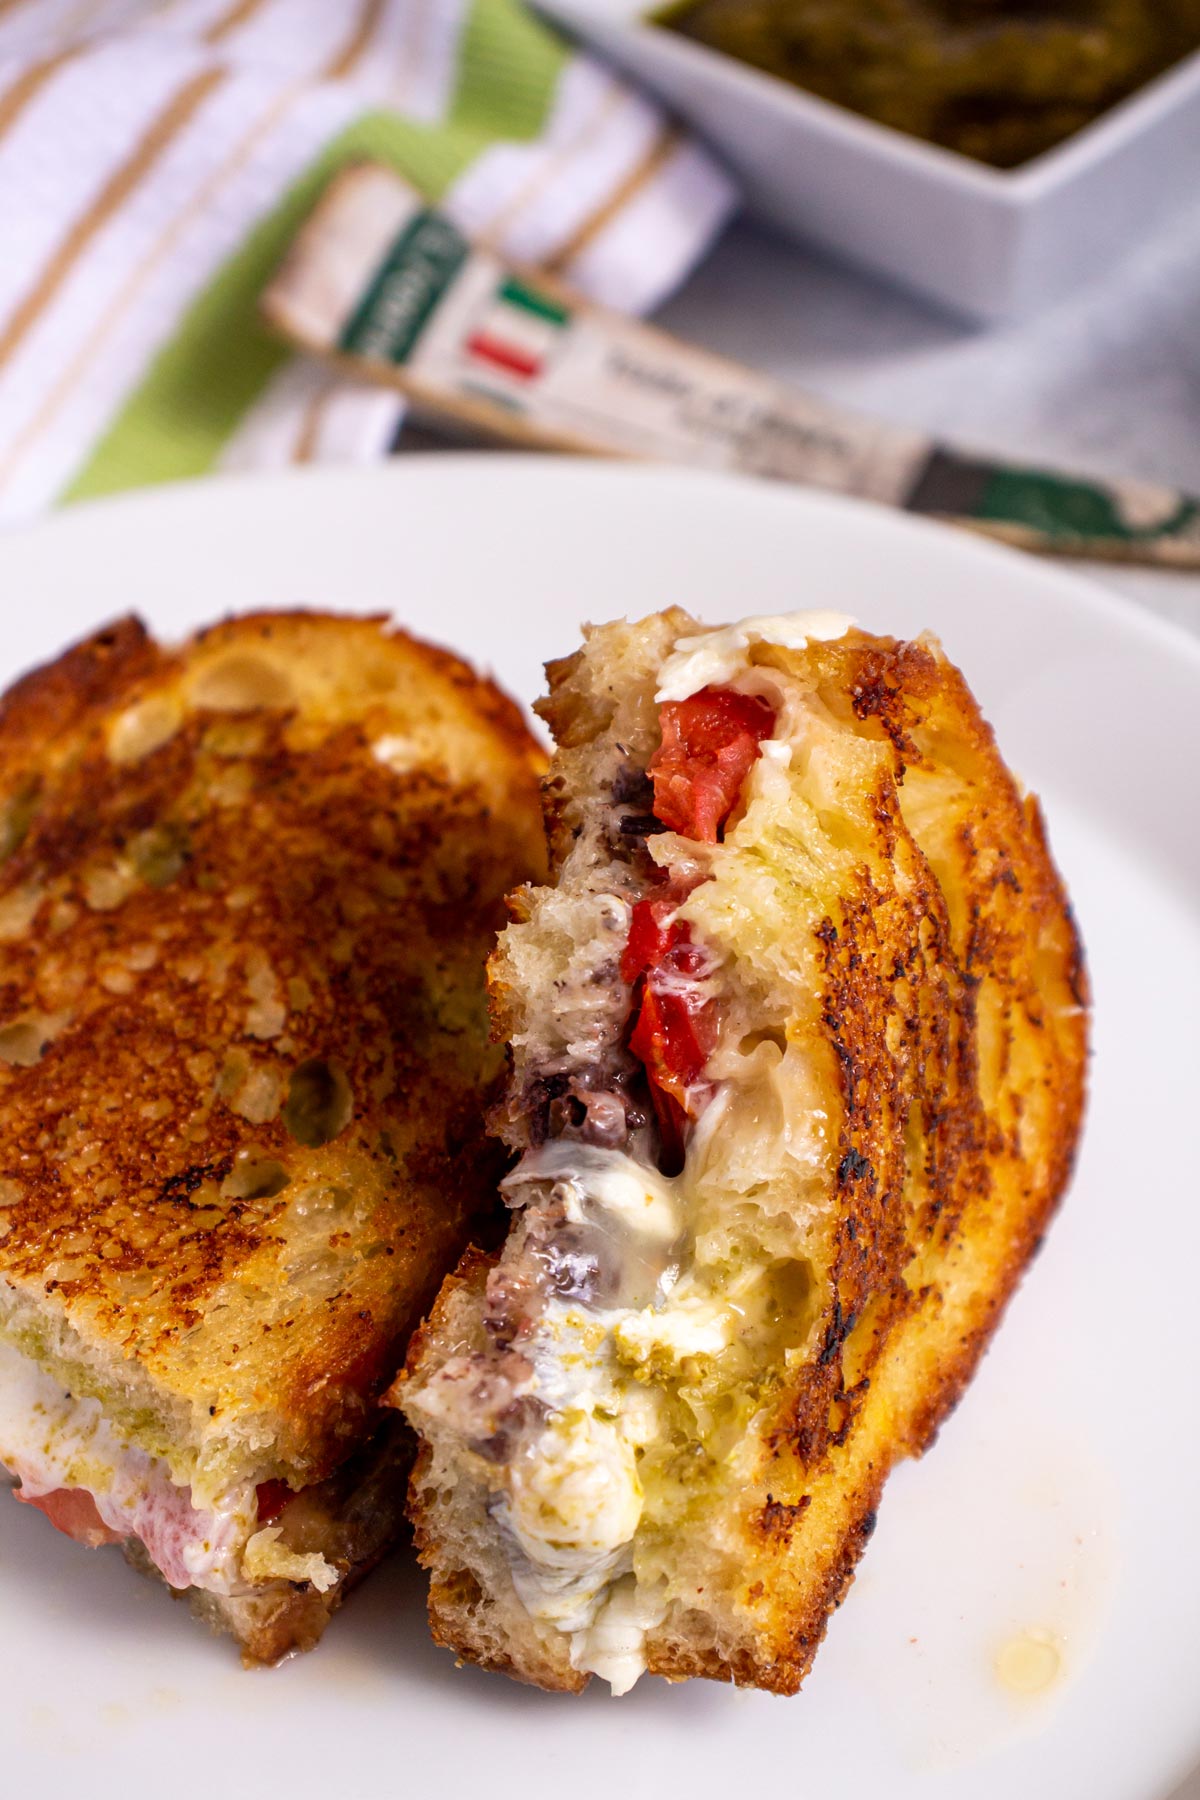 Closeup of a half-eaten grilled cheese sandwich with tomato, pesto, and olive tapenade.